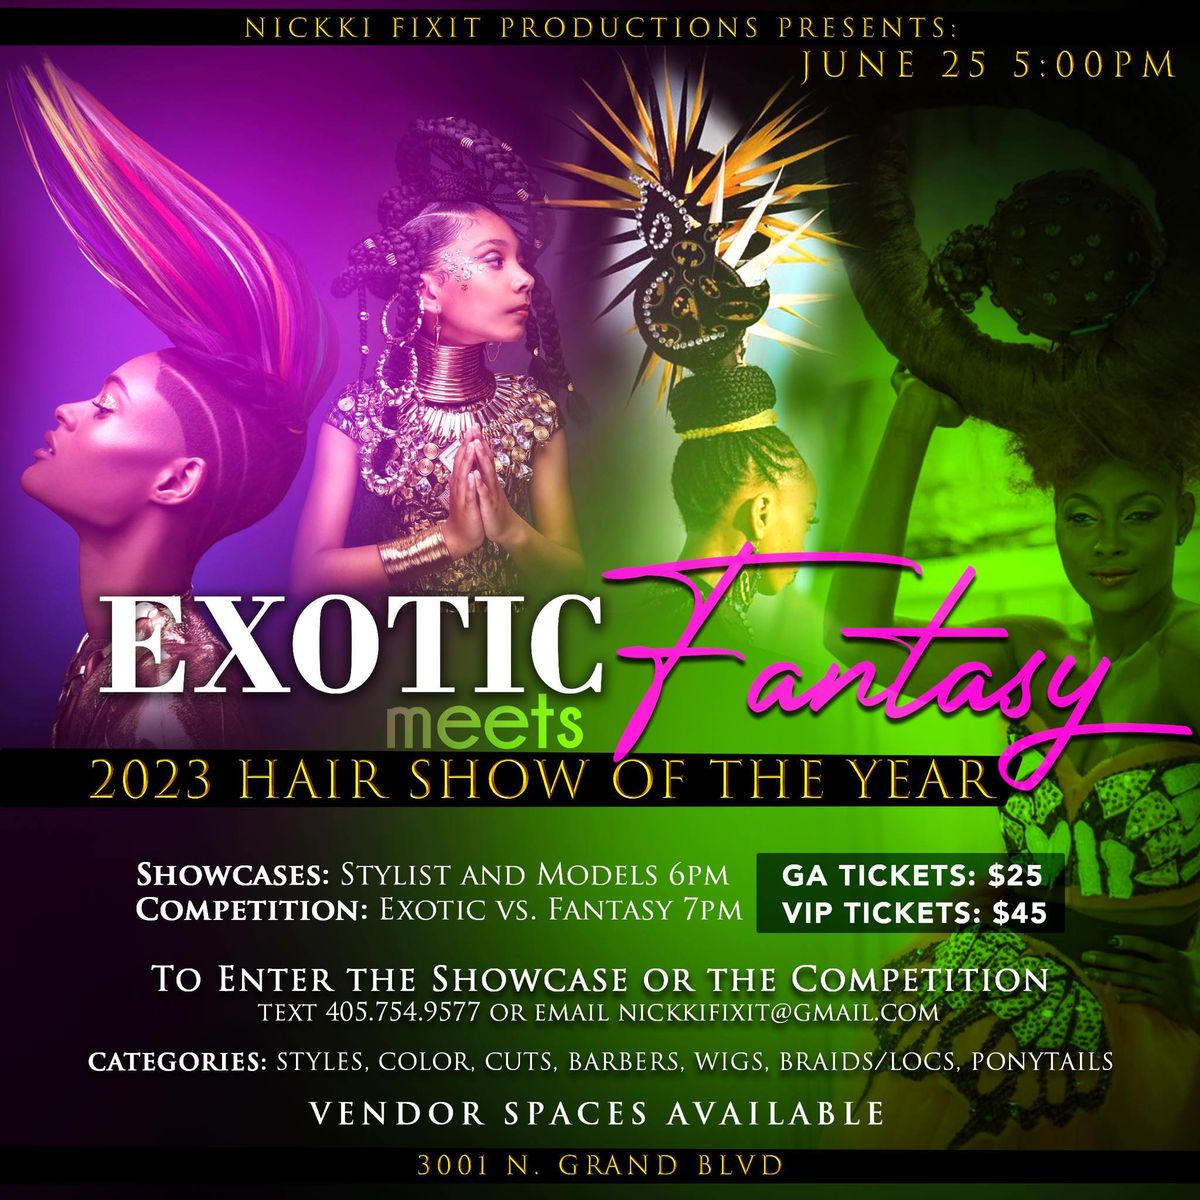 OKC Hair Show of the YEAR 2023